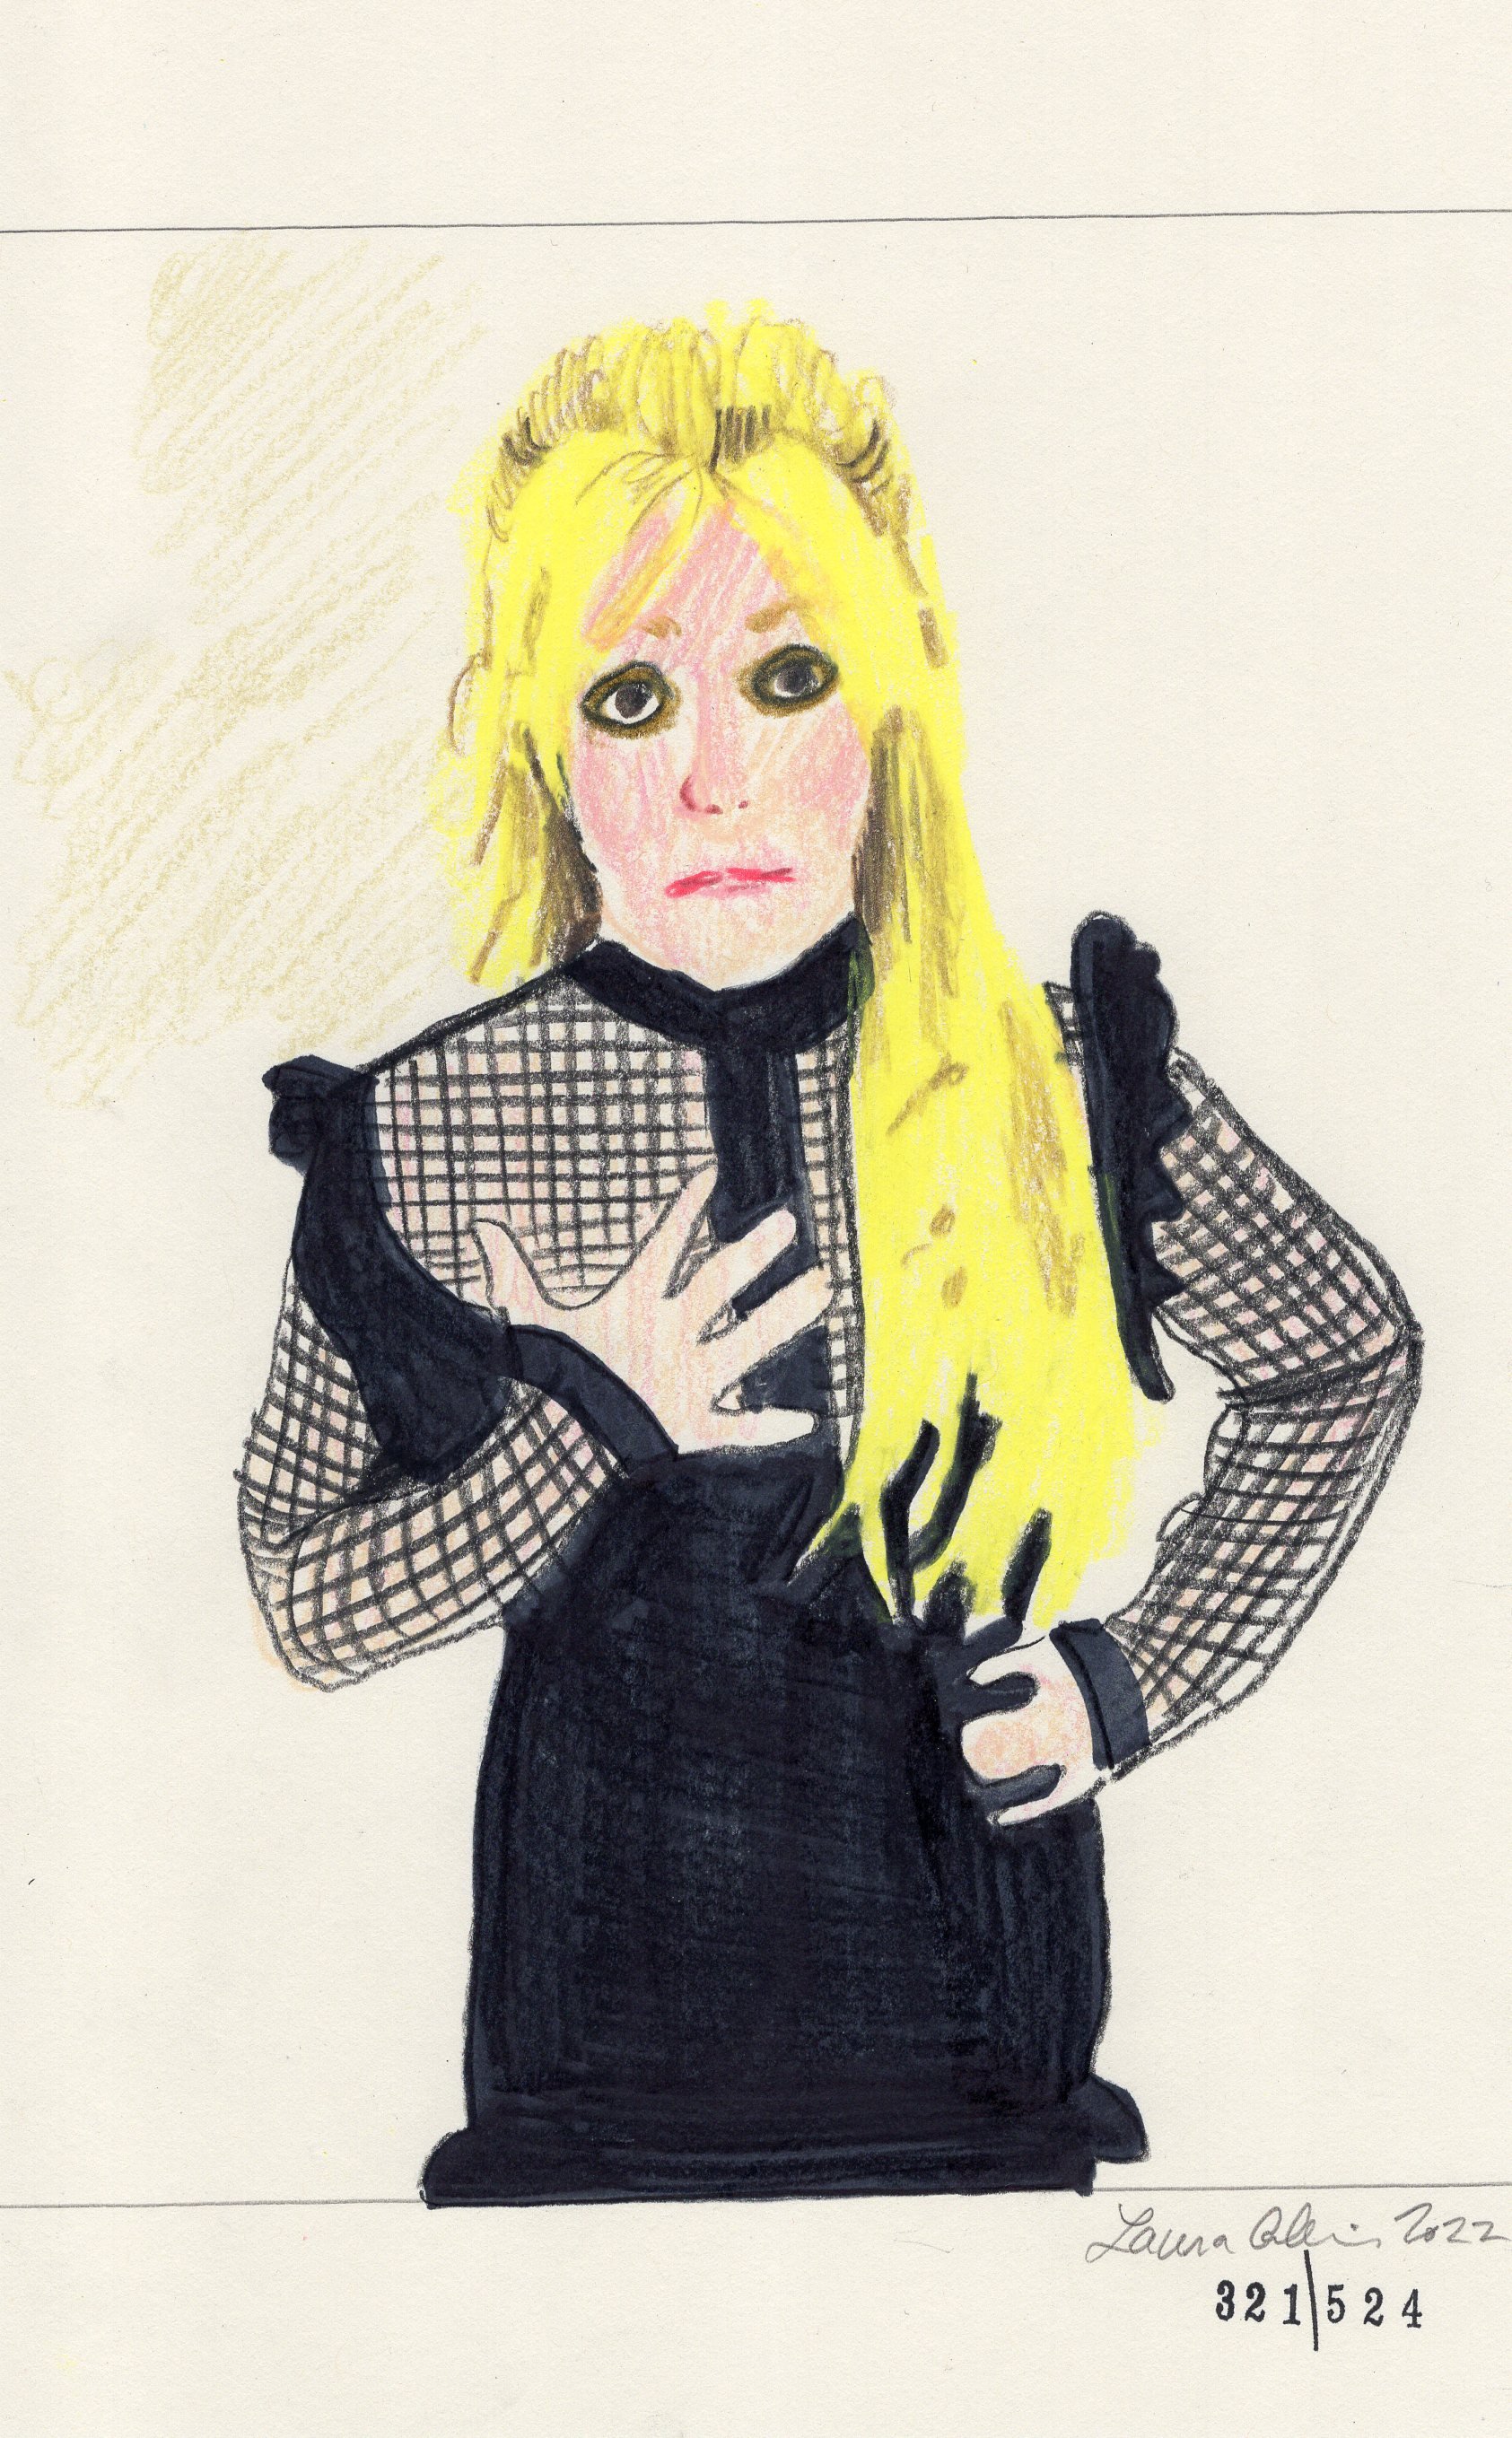 Laura Collins Britney Spears Animation 6x9in mixed media 2022 no321.jpg